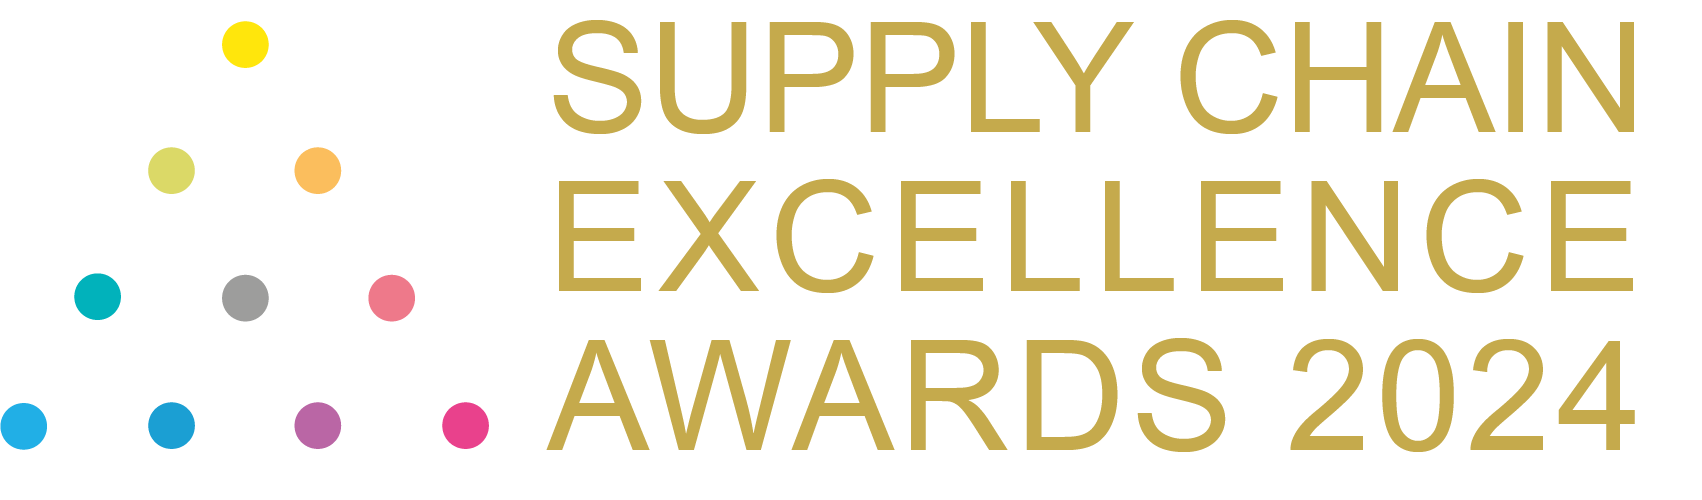 Top 30 Winners - Leaders in Supply Chain Awards 2023